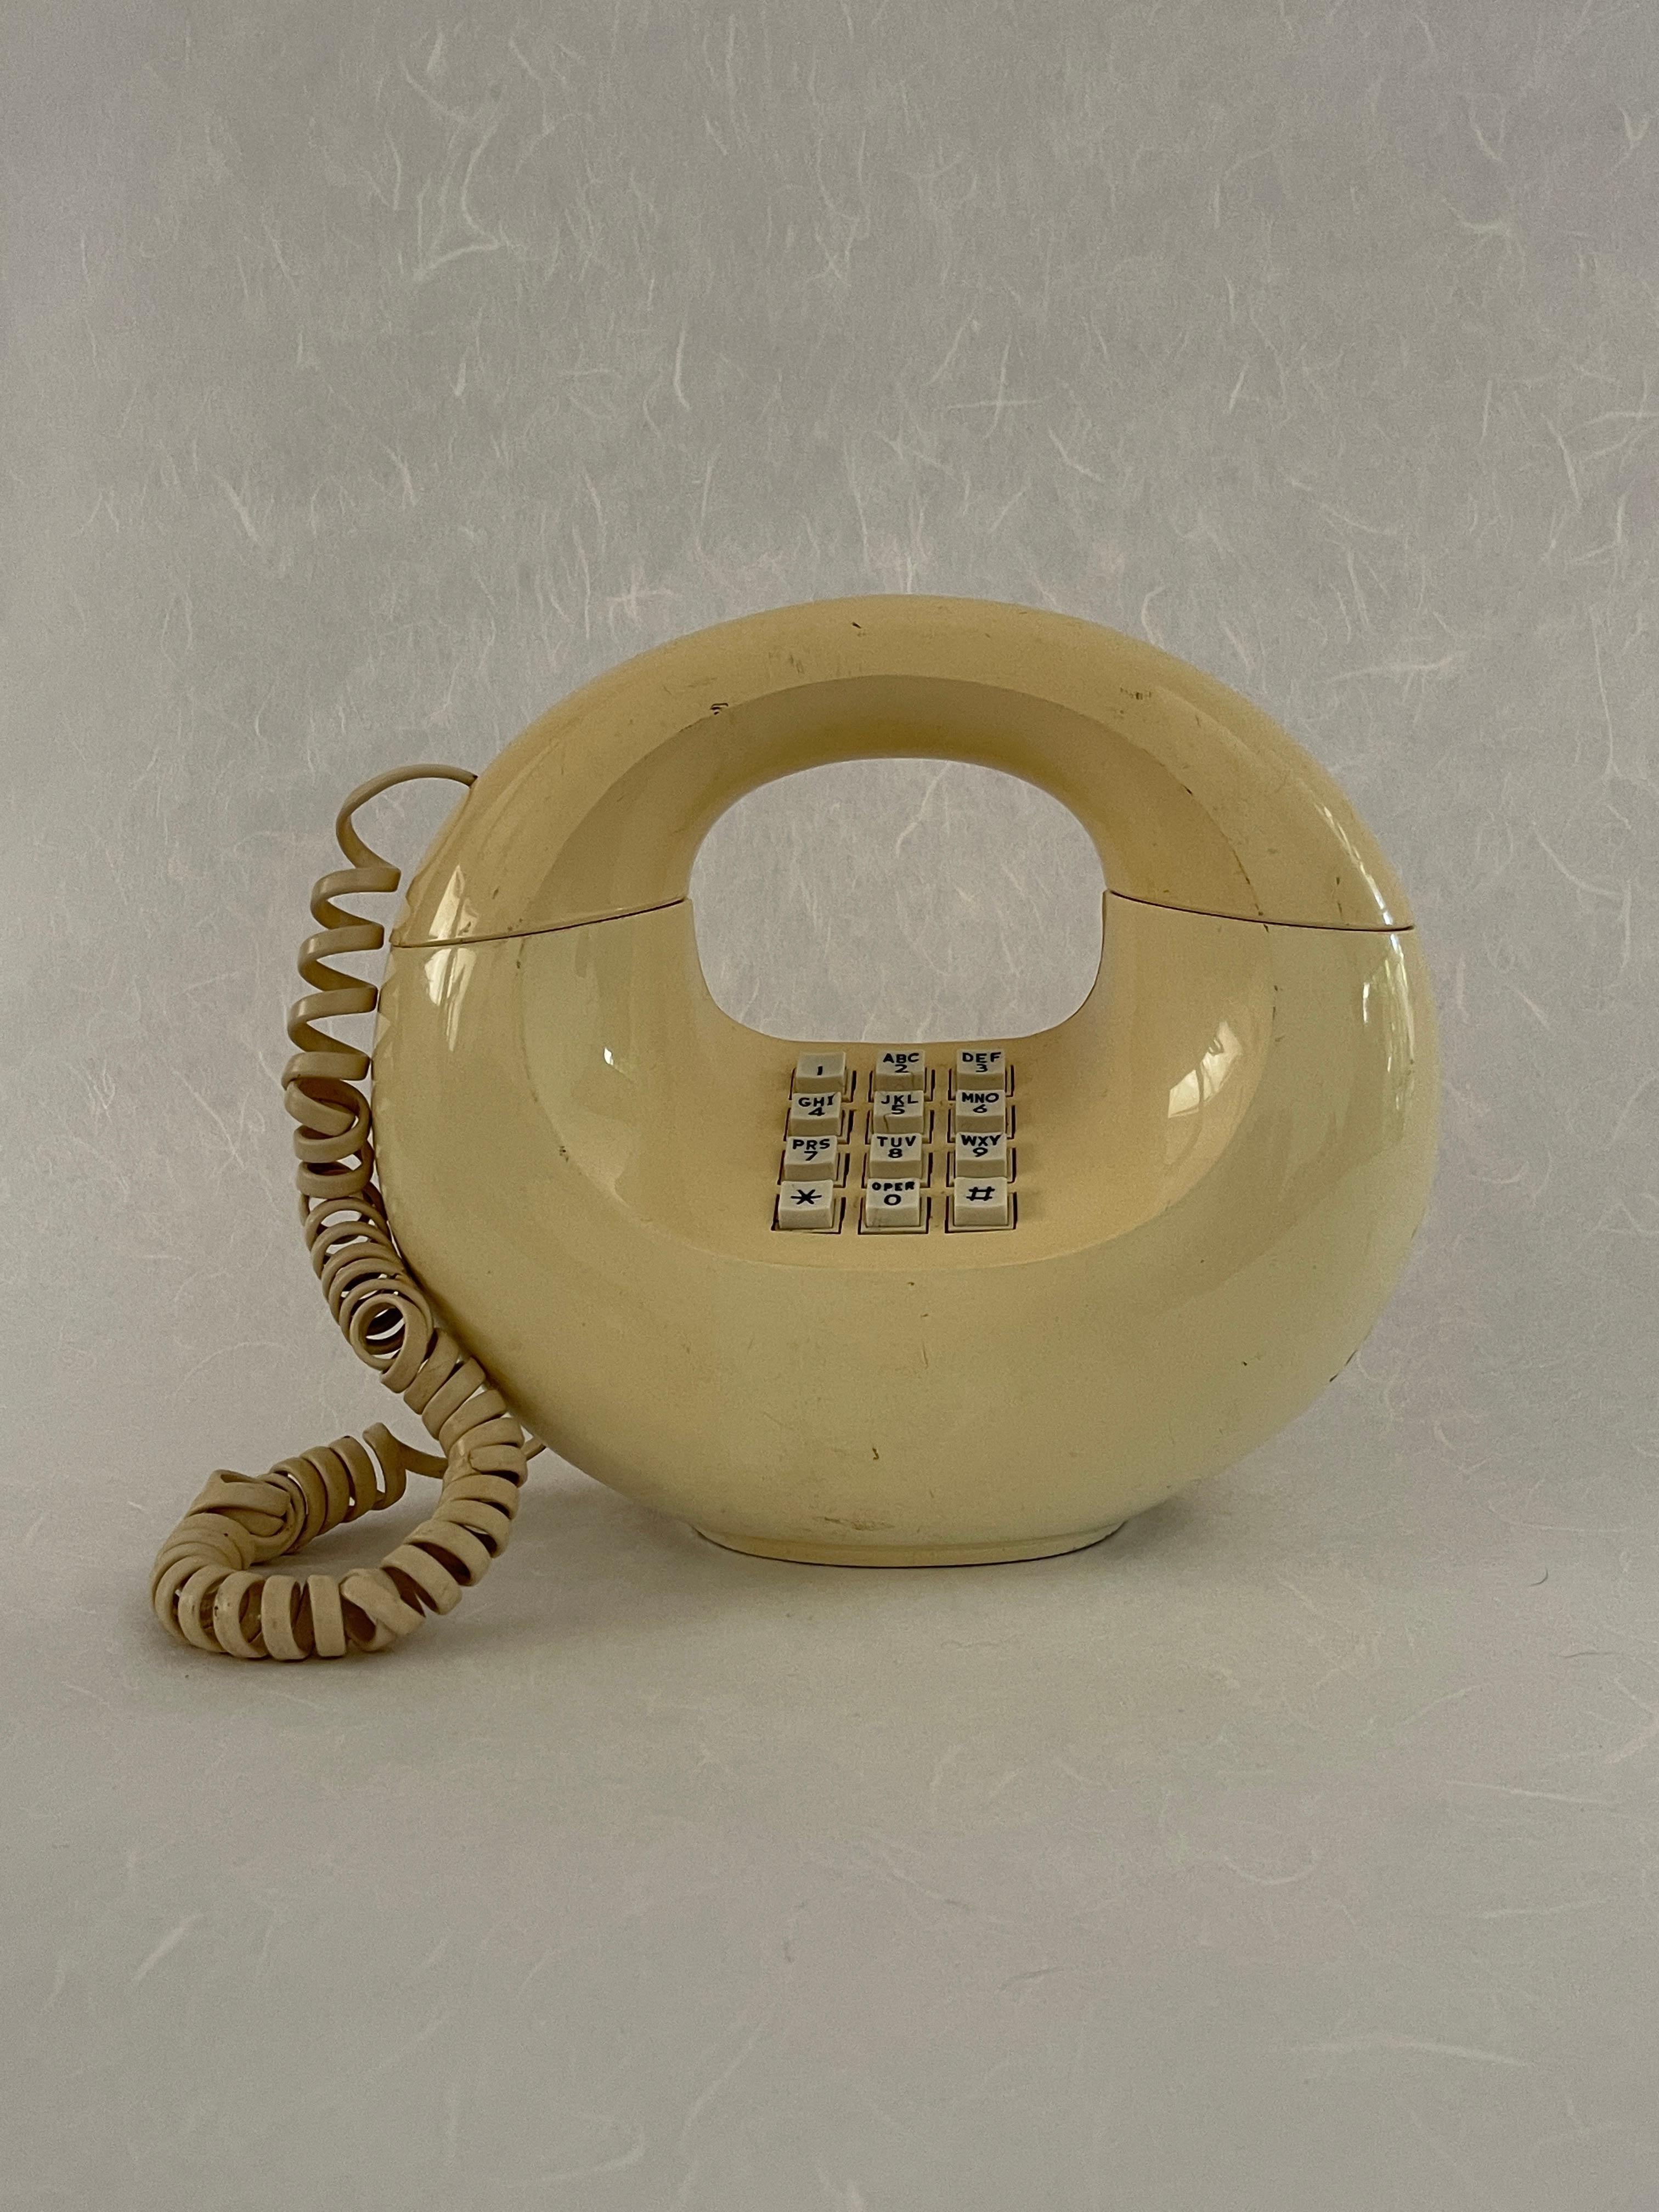 20th Century cream loop western electric telephone. Amazing vintage hoop telephone with an amazing color. Retro/space age style made in the 1970s.